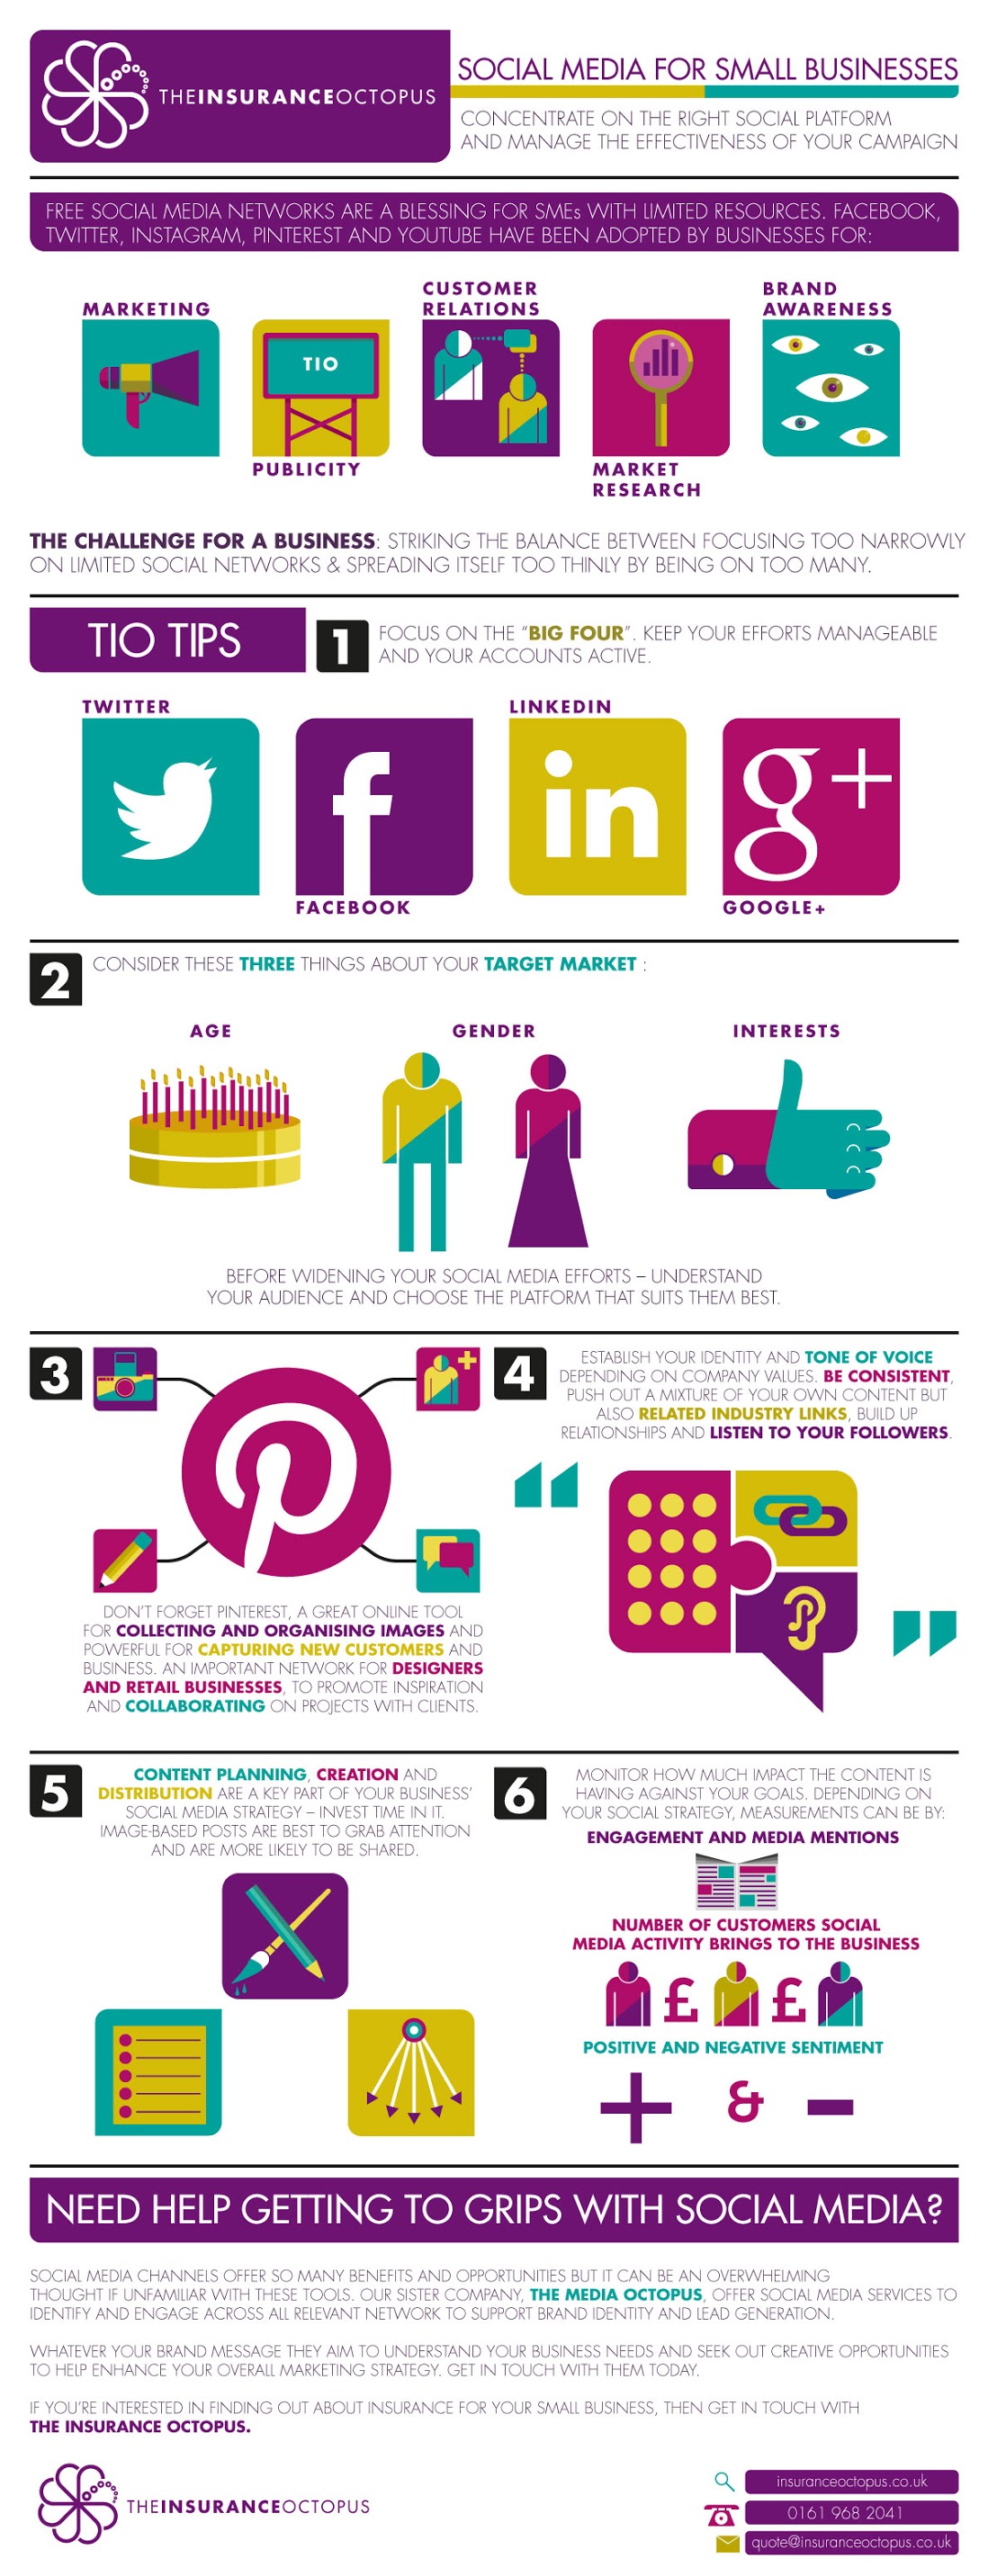 How To Make The Most Out Of Your #SocialMedia - #infographic